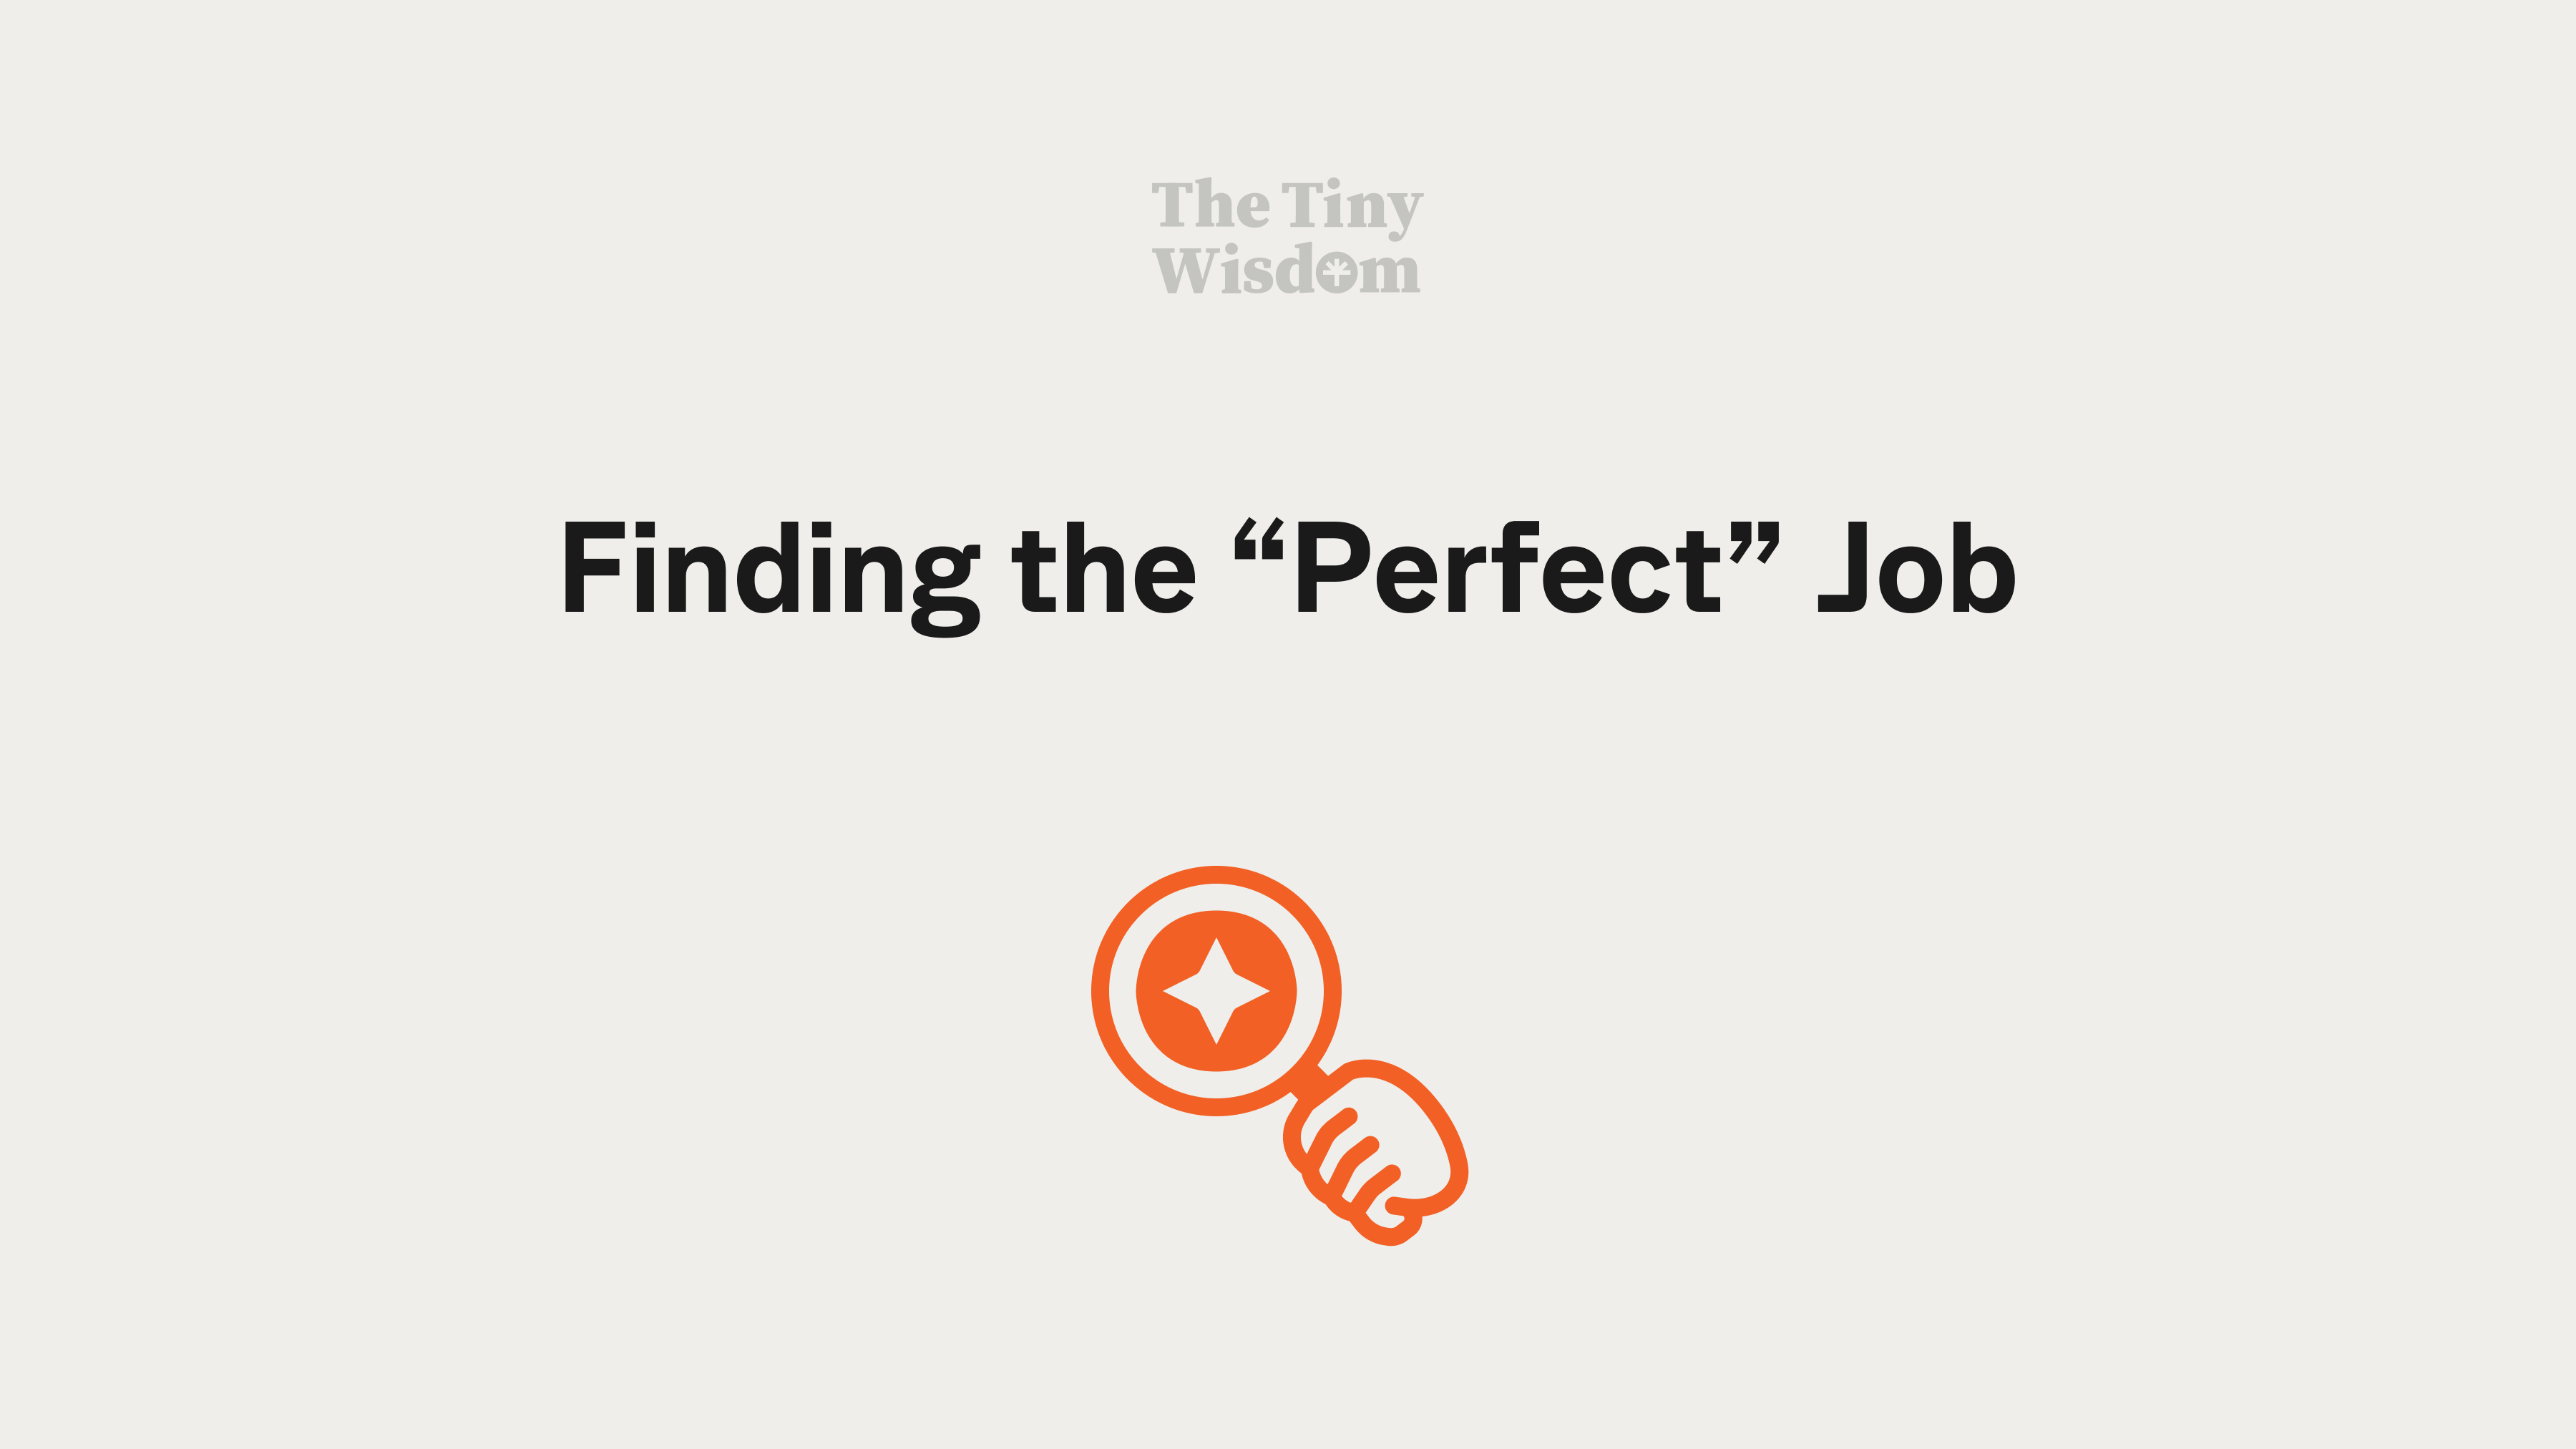 Finding the "Perfect" Job